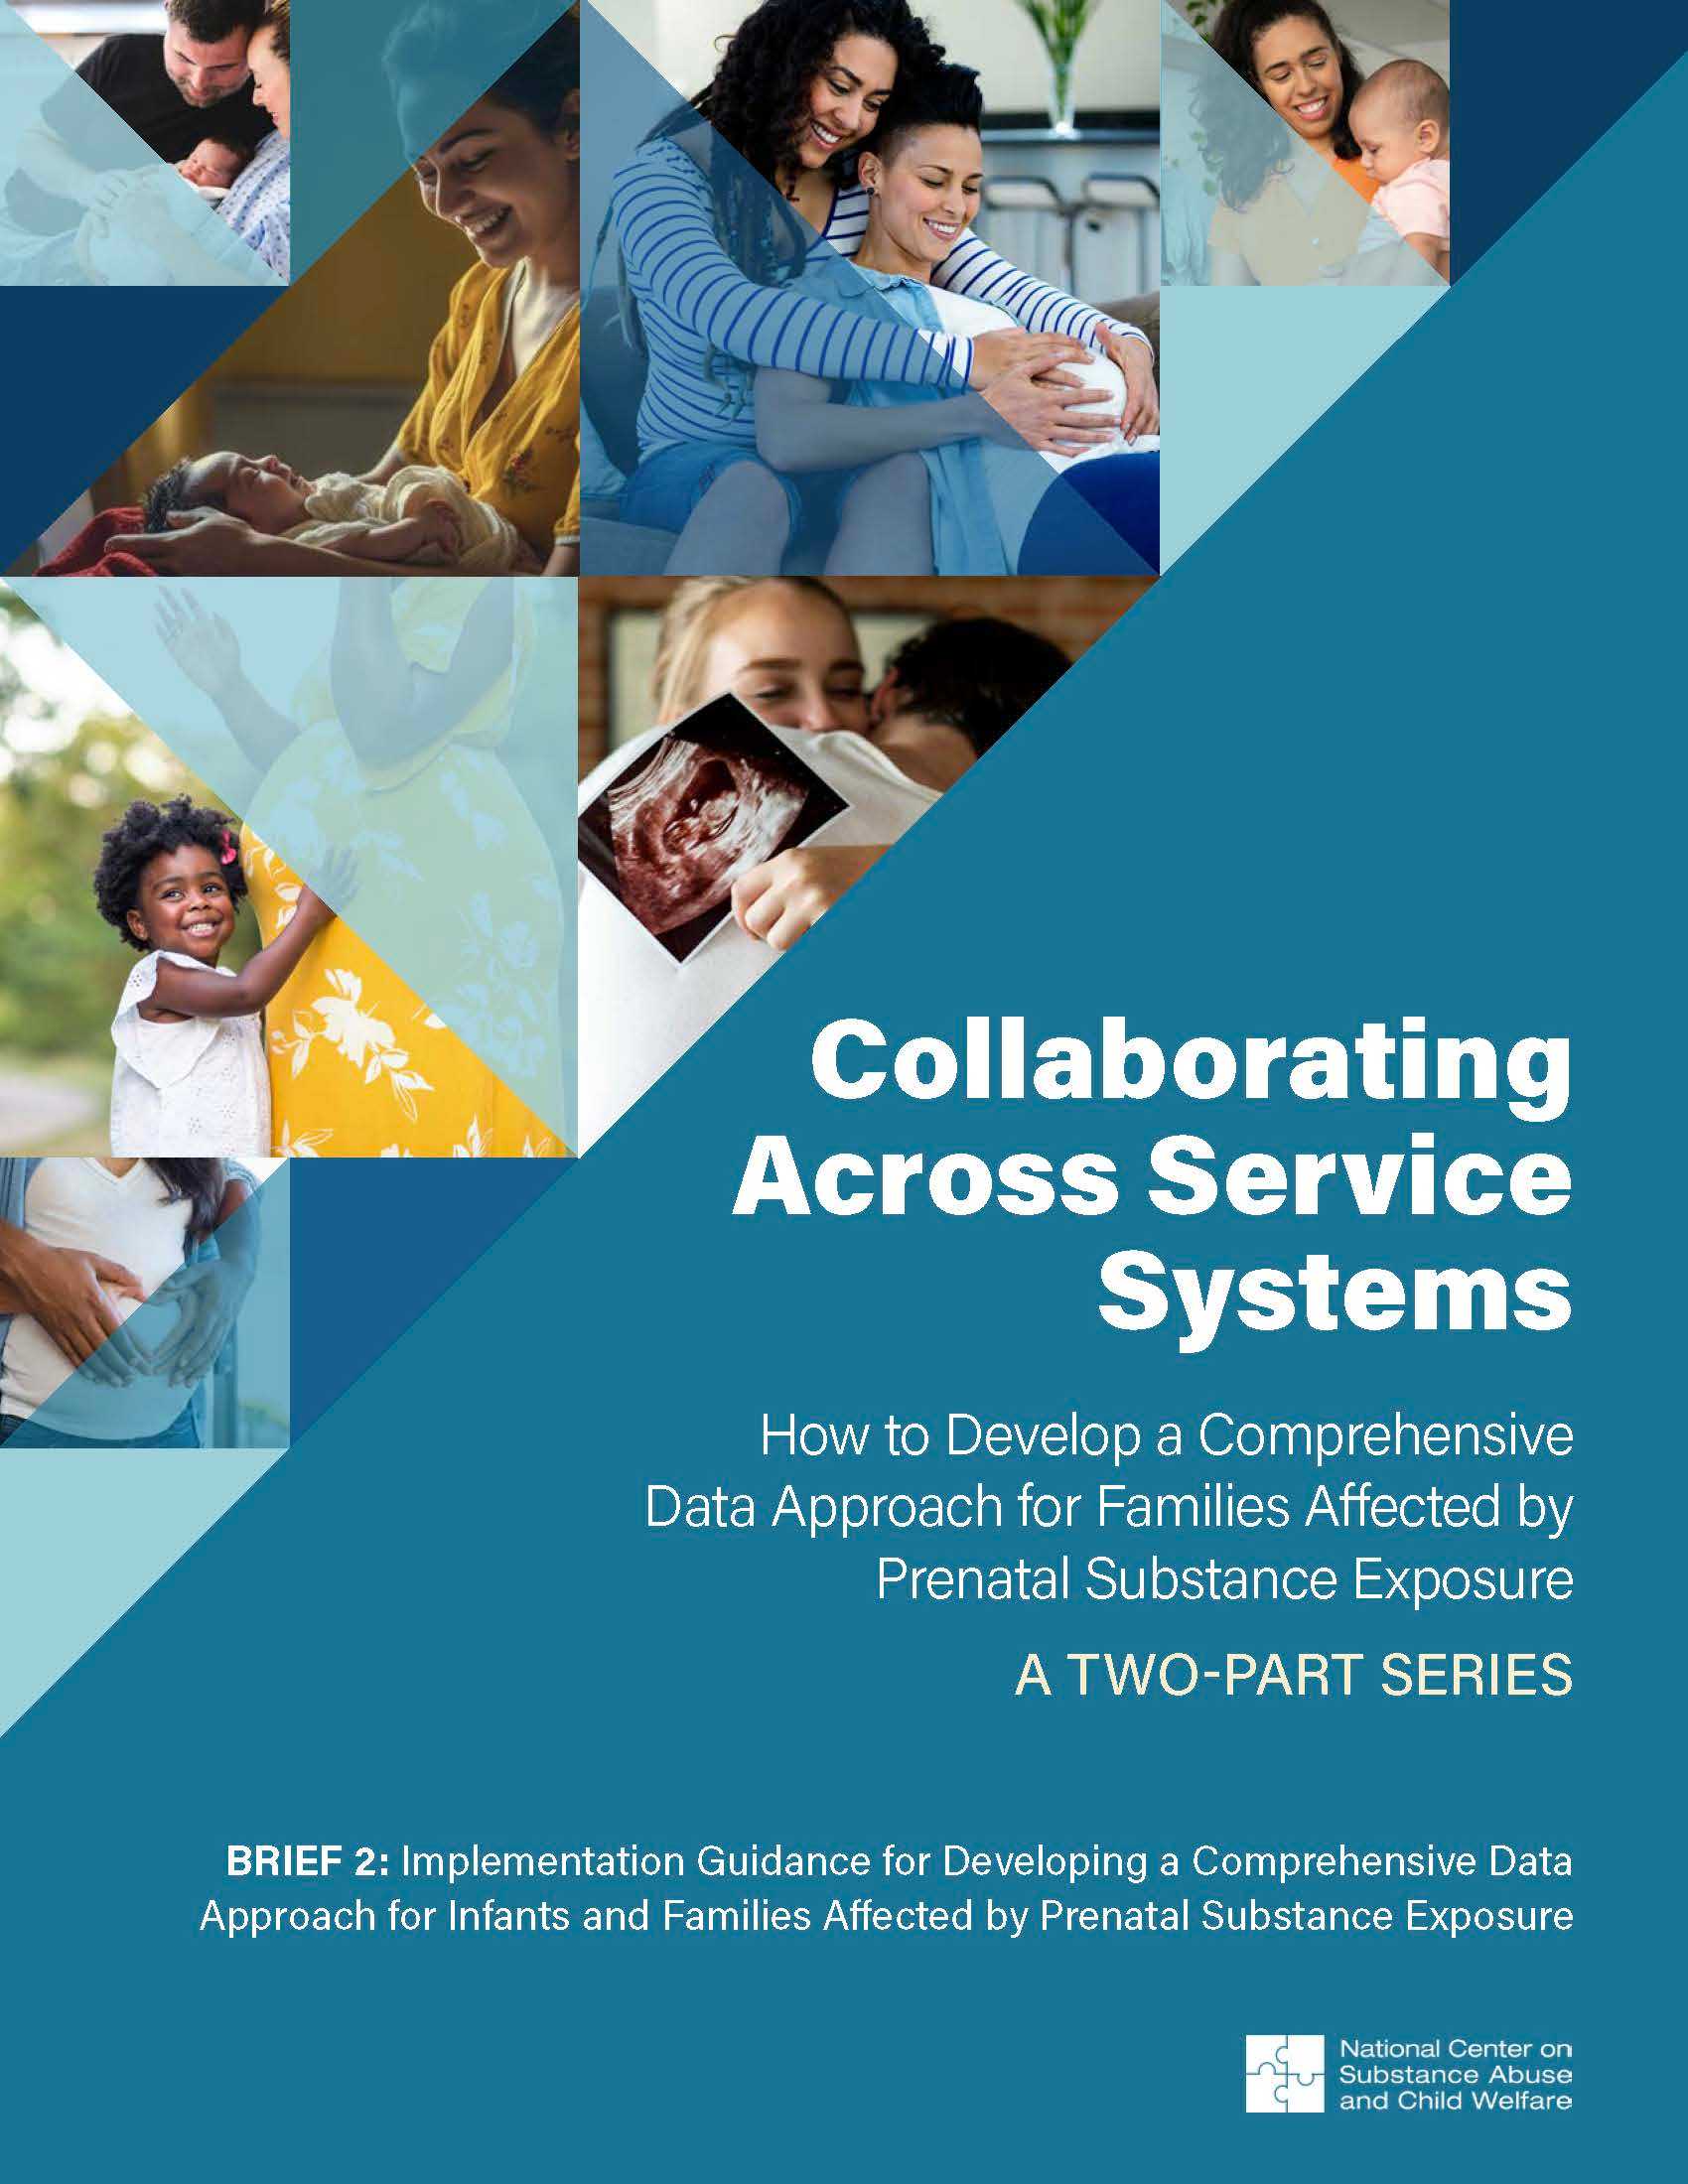 Brief 2: Implementation Guidance for Developing a Comprehensive Data Approach for Infants and Families Affected by Prenatal Substance Exposure